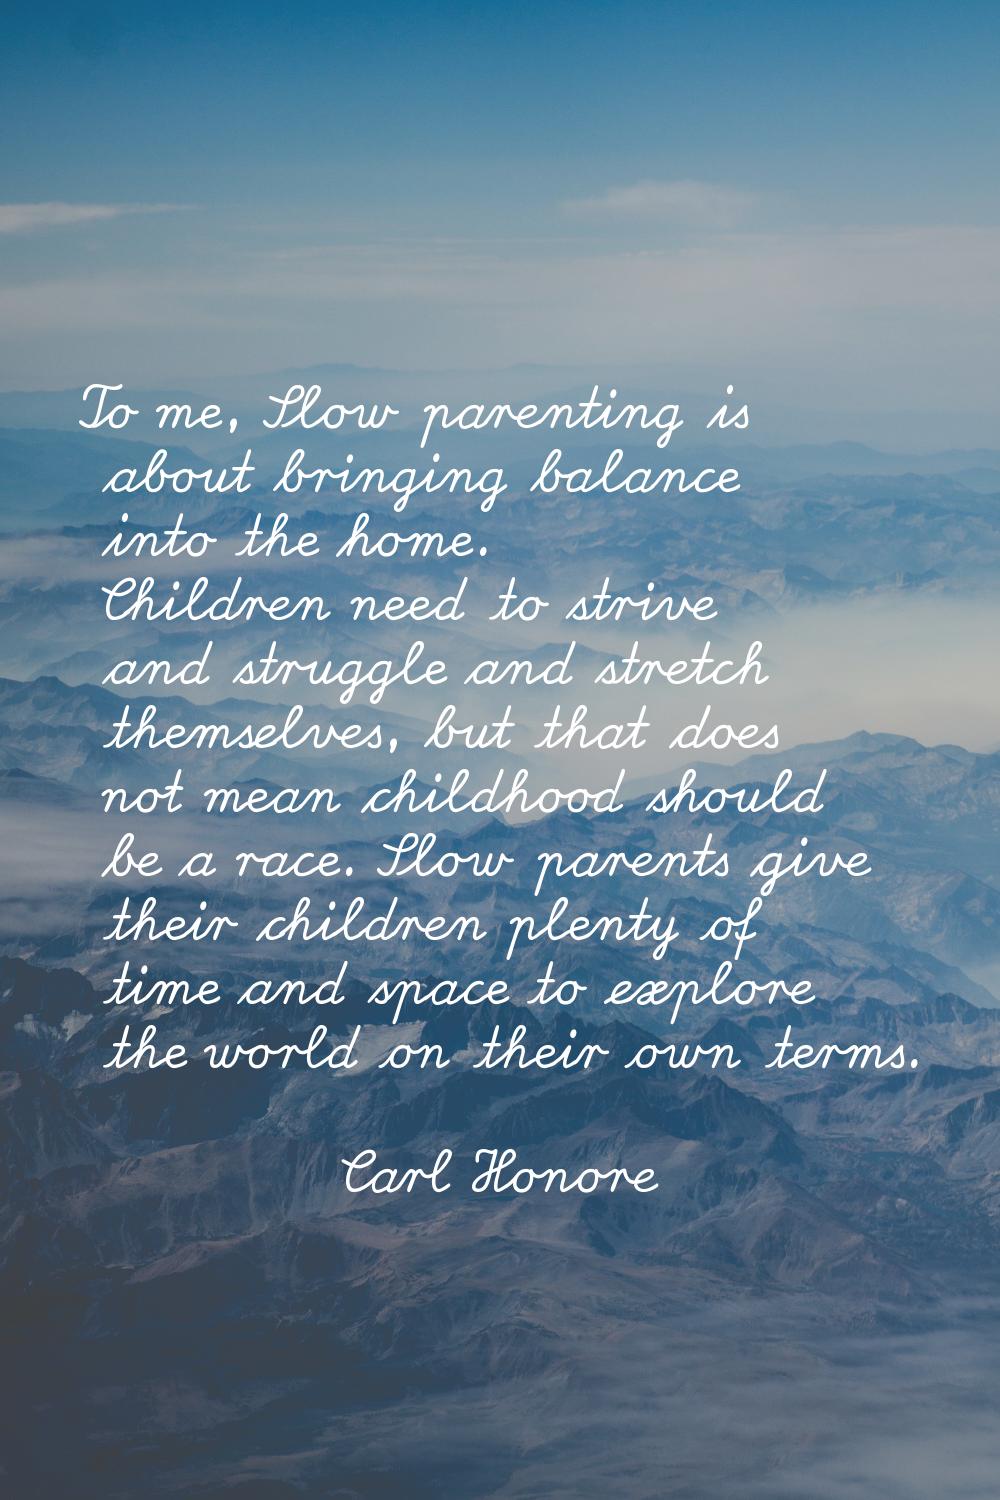 To me, Slow parenting is about bringing balance into the home. Children need to strive and struggle